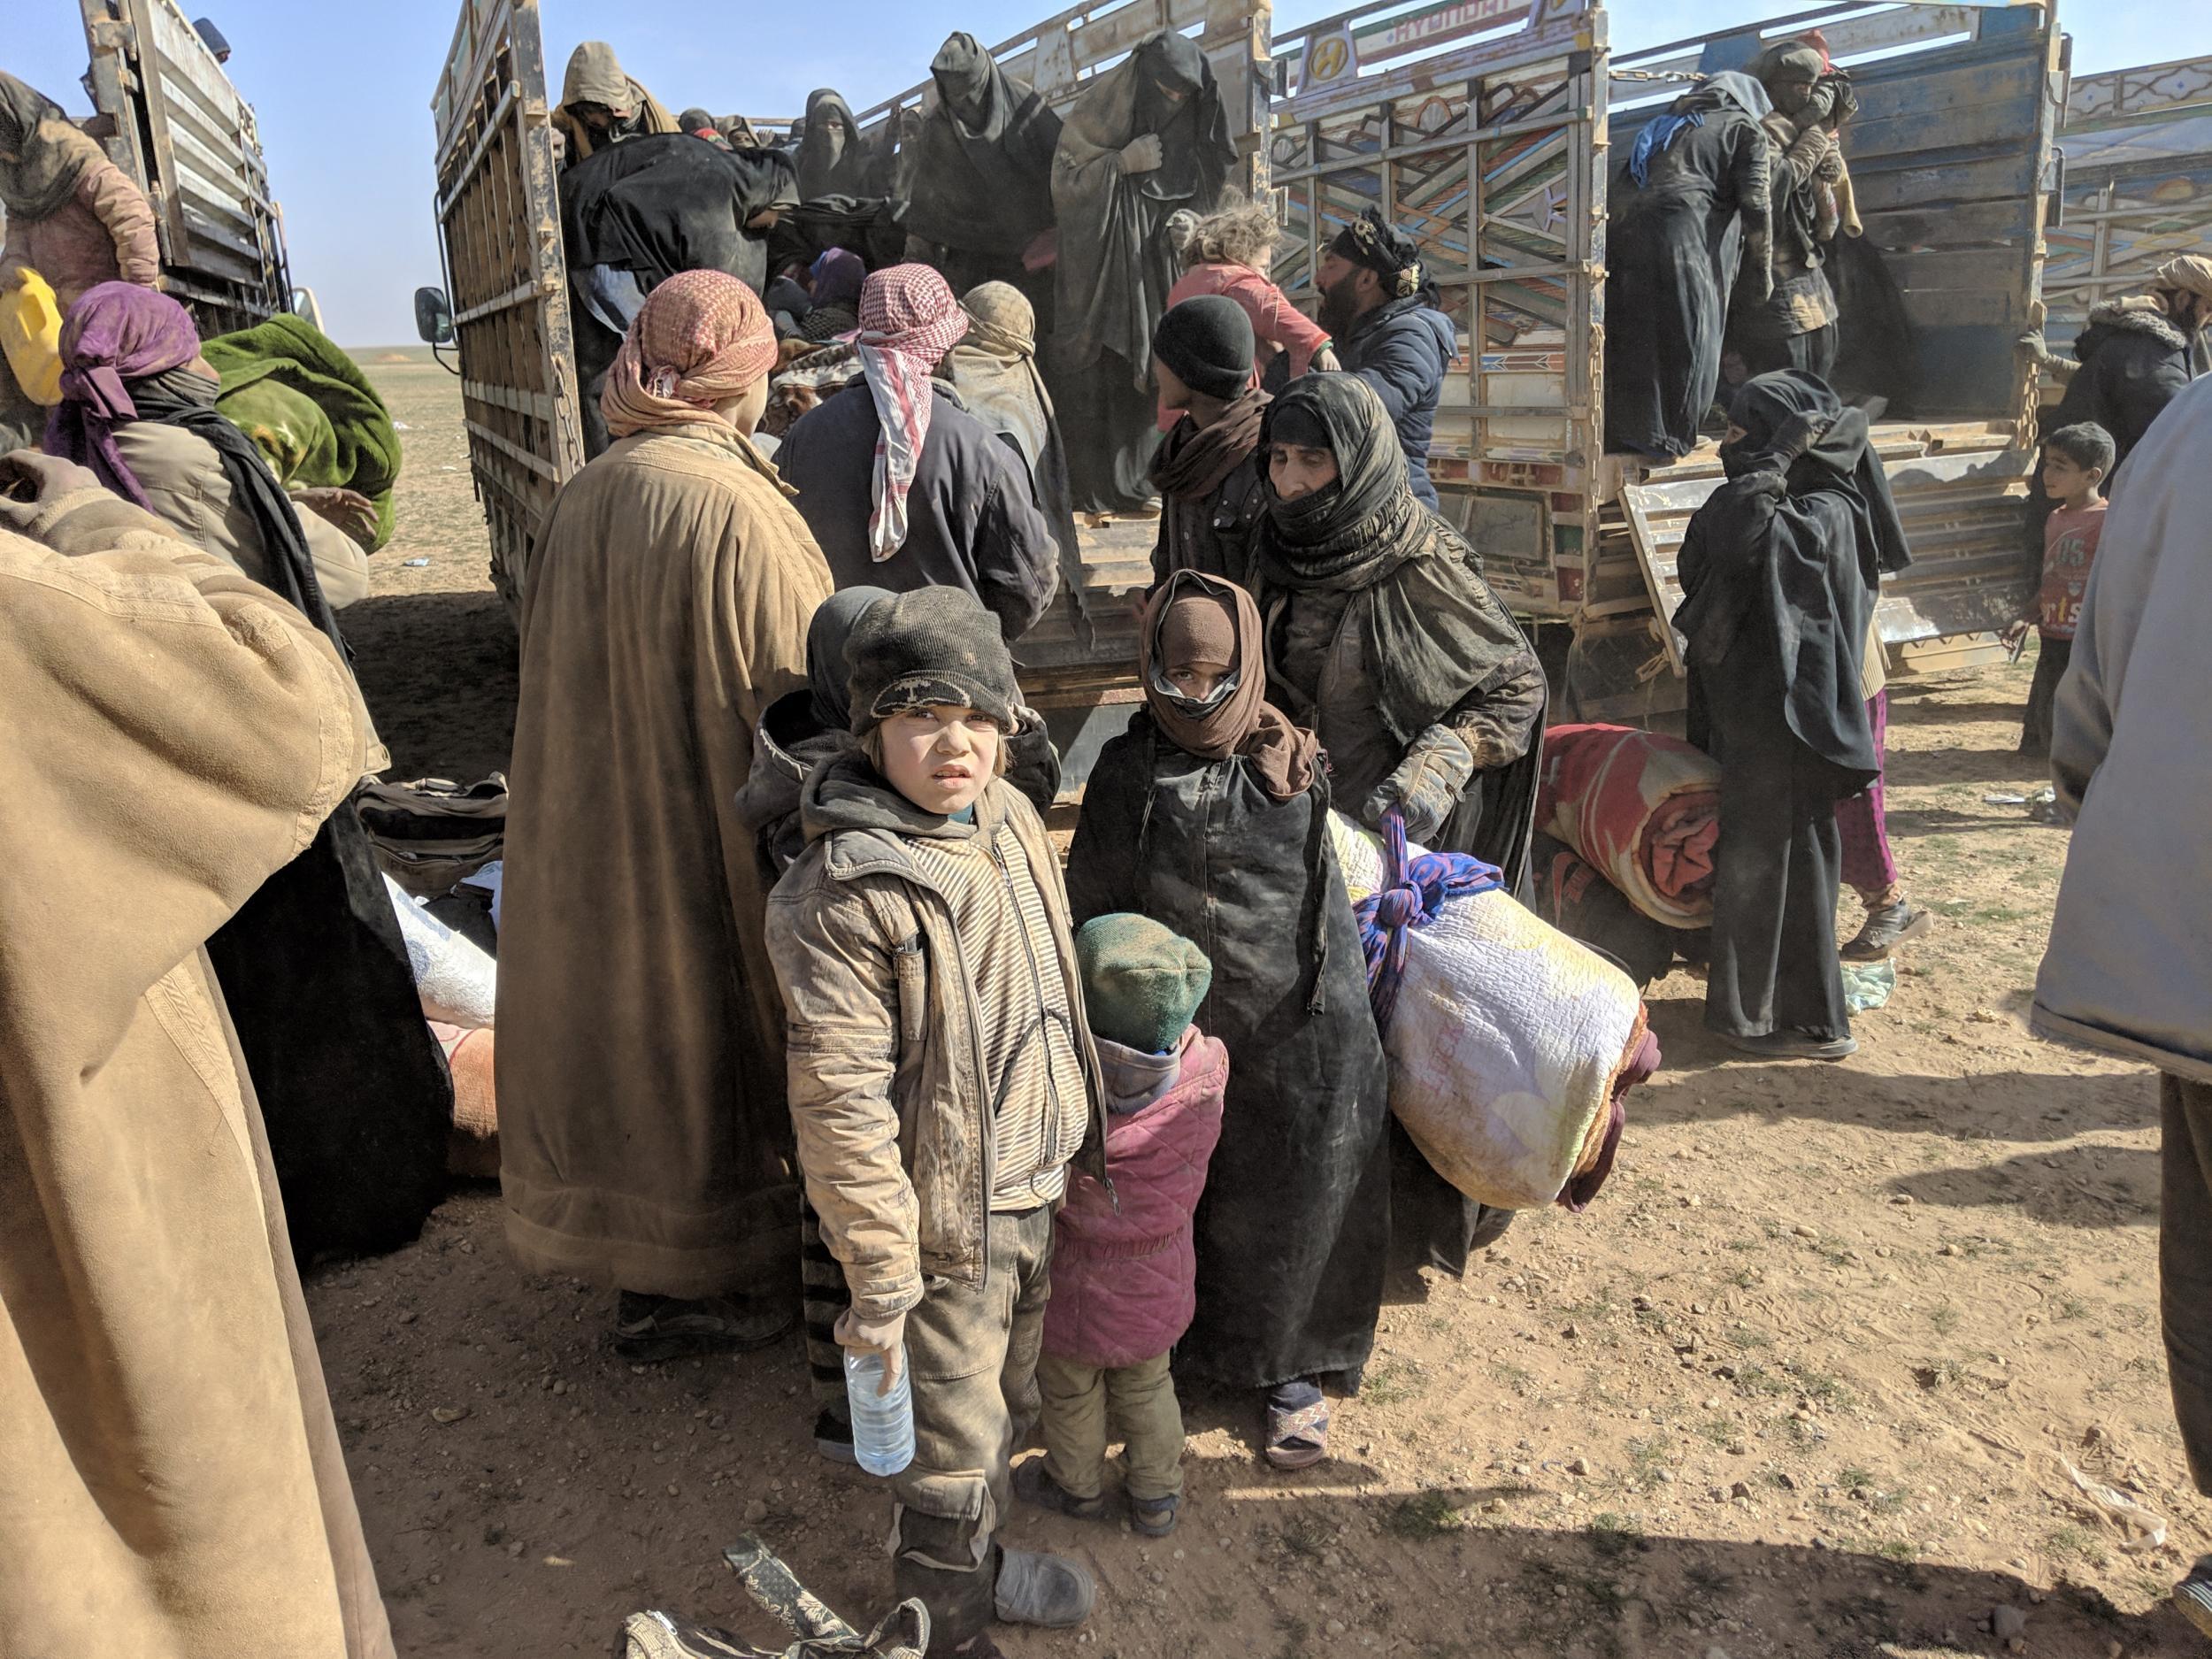 'It’s a race against the clock to try and reach those most in need of urgent medical care,' says Wendy Taeuber, the IRC's Syria director (Richard Hall/The Independent)